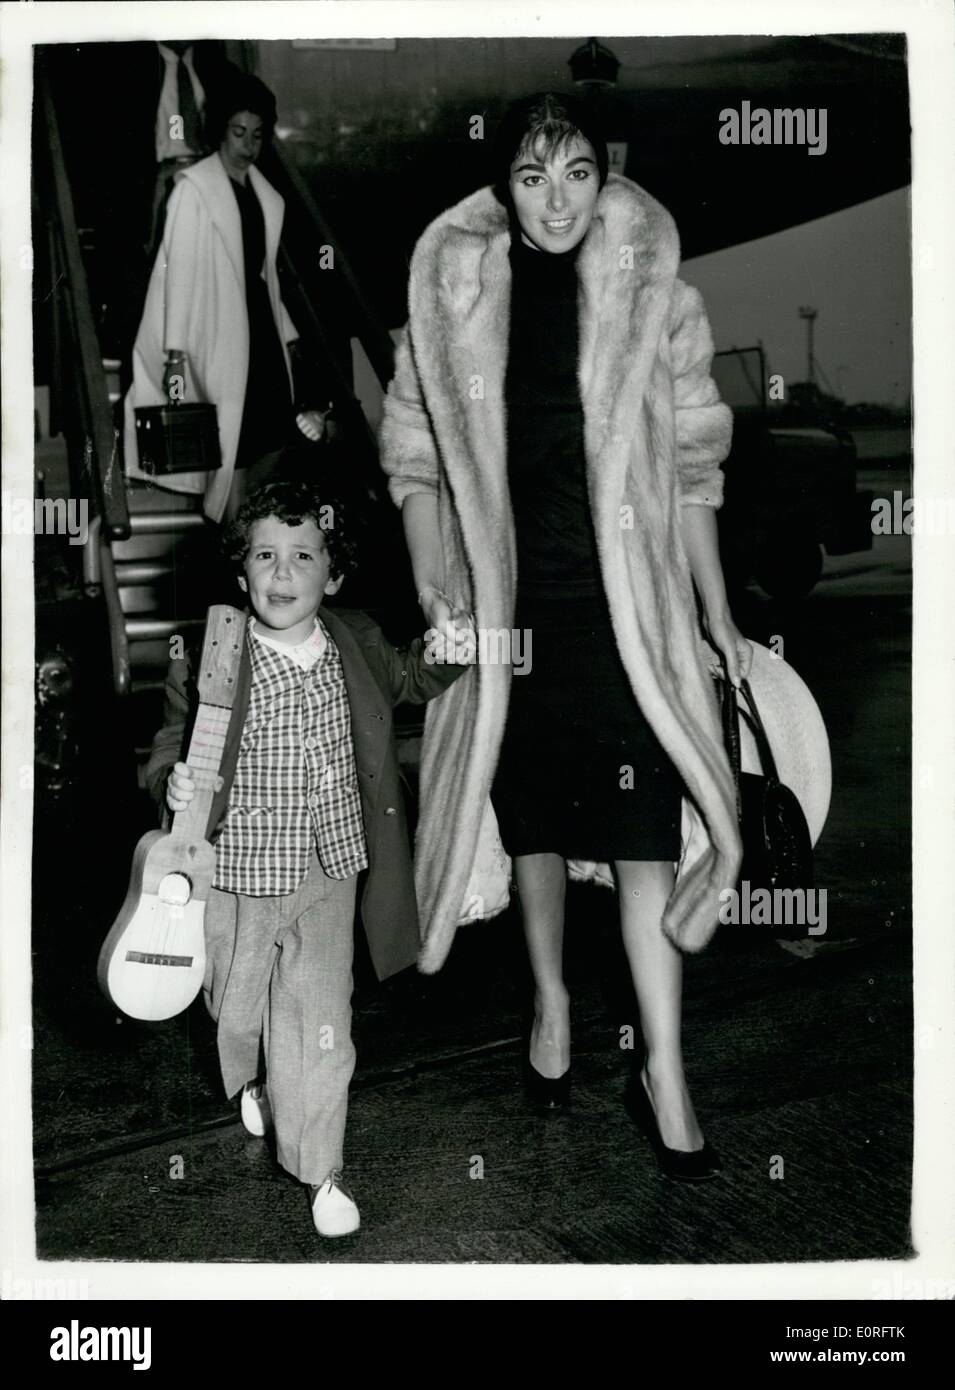 May 05, 1959 - Pier Angeli And Her Three-Year-Old Son Fly Into London Airport From Las Palmas: Two angry film stars - Eva Bartok and Pier Angeli - stranded with their children yesterday at Las Palmas airport, eventually got away from there by air today. Eva and Pier who had been filming in ''S.O.S.Pacific'' in the Canary Islands, should have flown back to England yesterday with the rest of the film unit. But airline officials told them they could not take their children with them because of a ruling that only passengers who had flown out by the chartered airplane could fly back by it Stock Photo